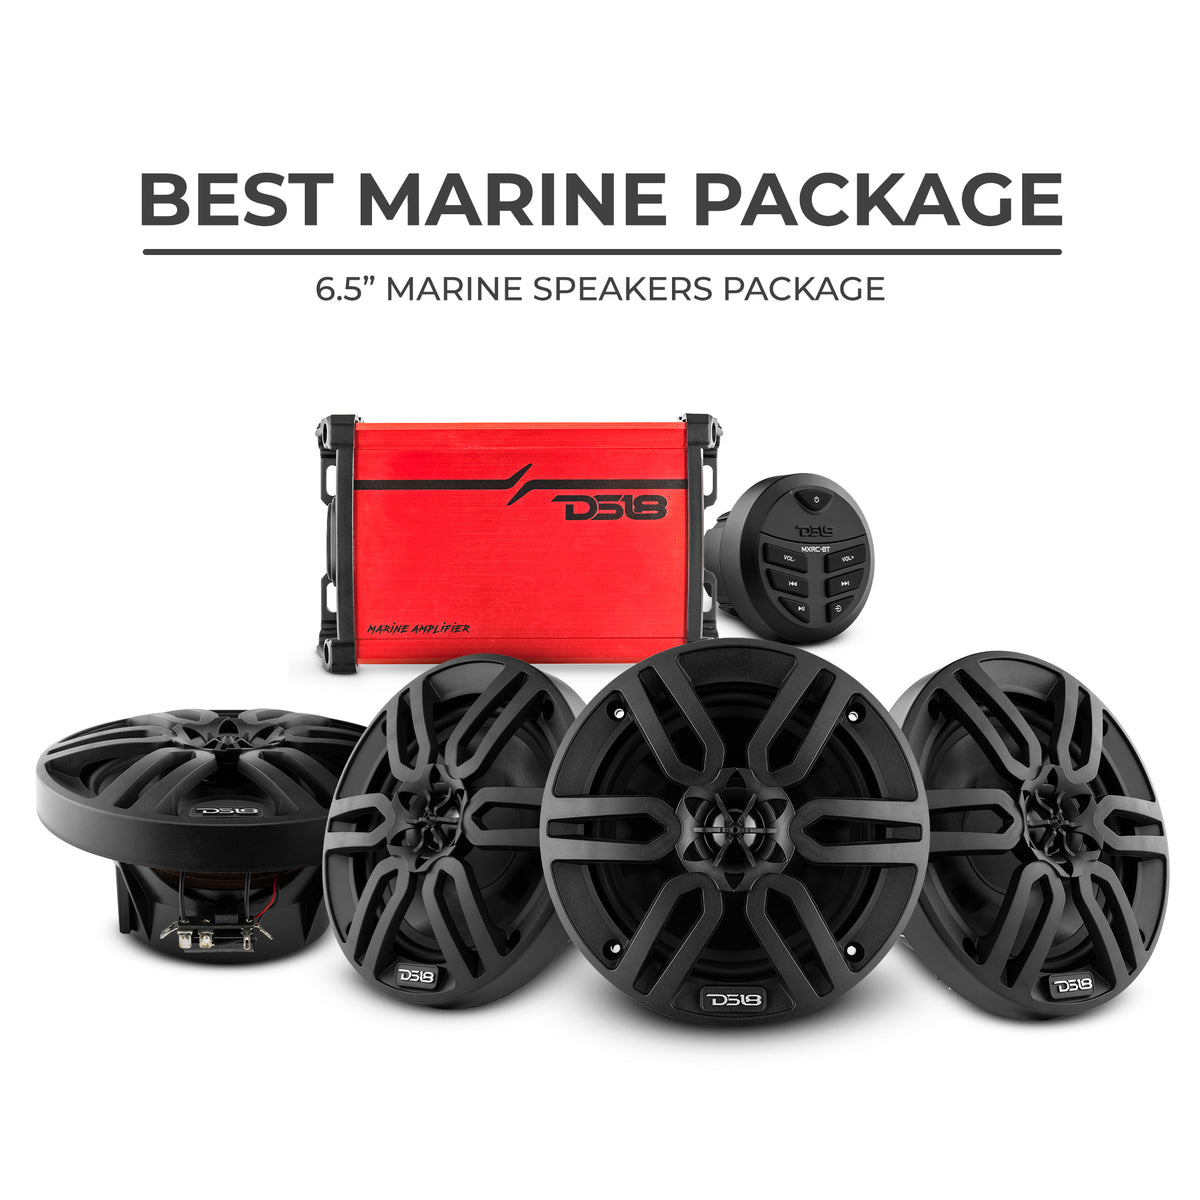 Best Marine Audio Package - 4 X 6.5" Speakers with Head Unit & 4 Channel Amplifier